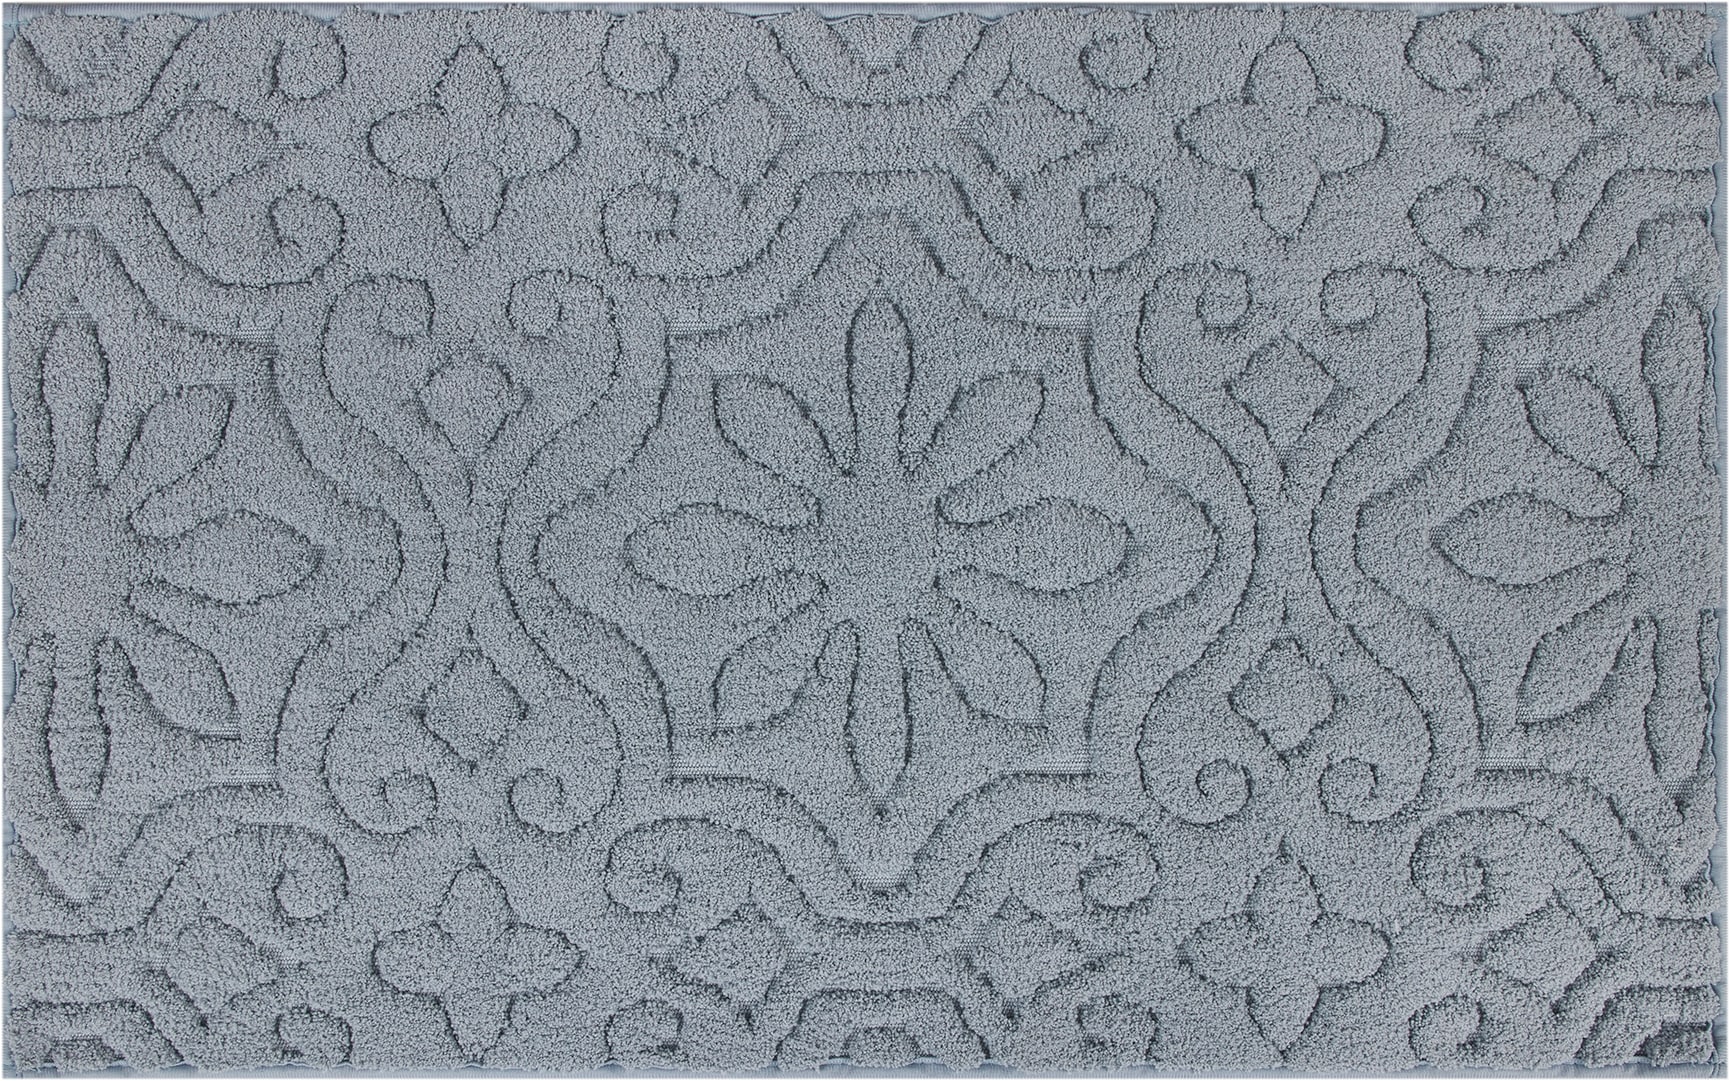 allen + roth 24-in x 60-in Dark Gray Polyester Bath Rug in the Bathroom Rugs  & Mats department at